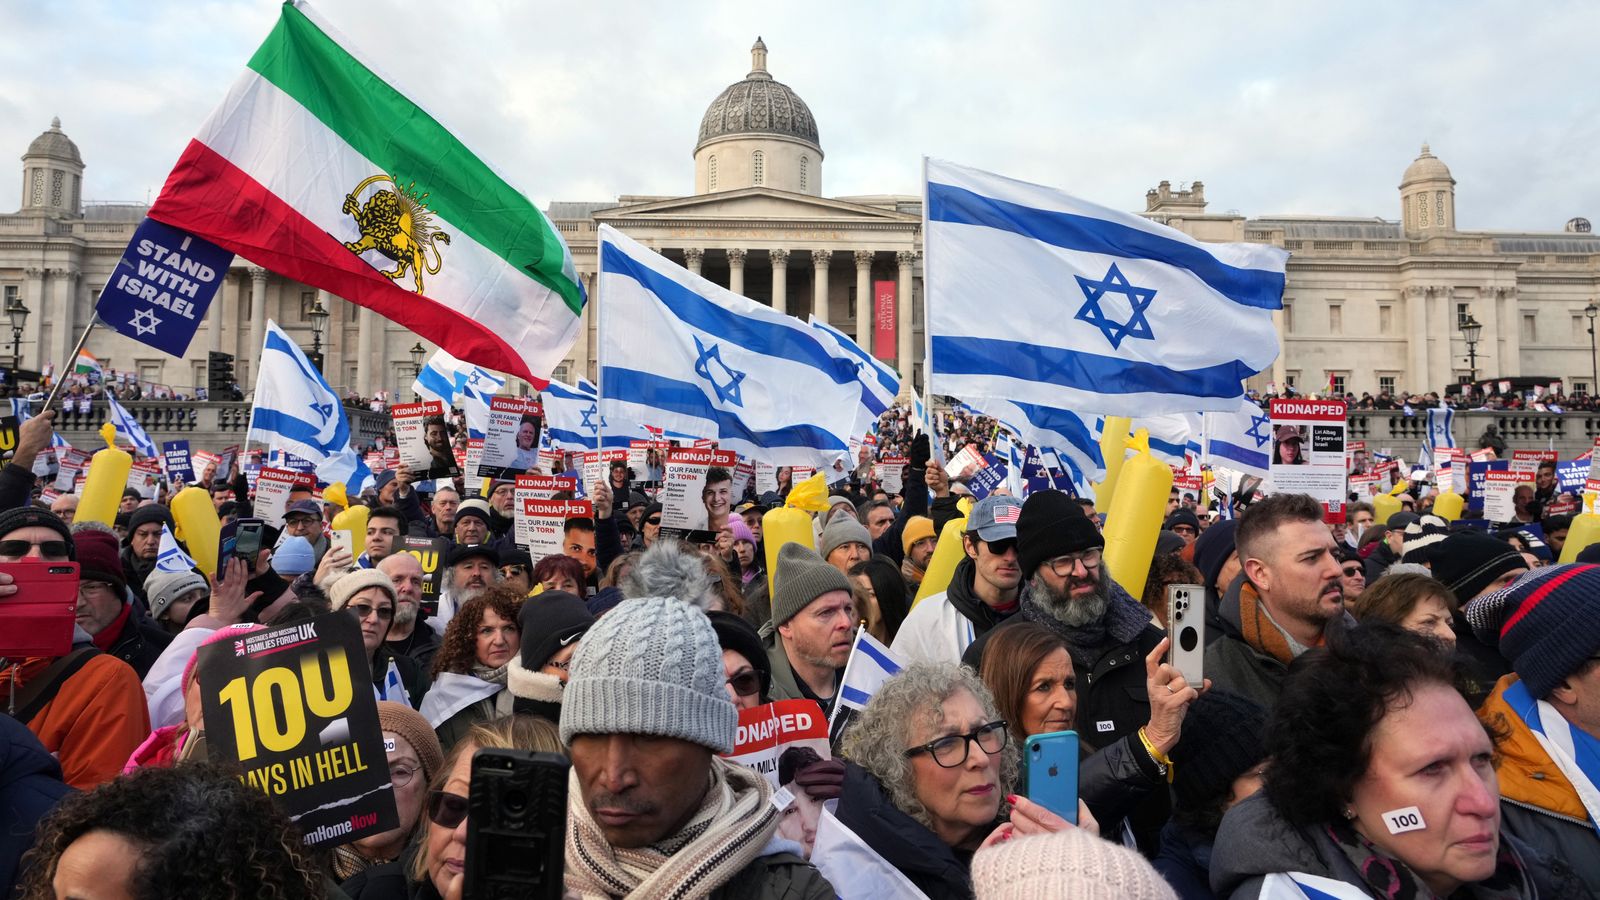 Middle East crisis – live updates: Missile kills woman and son in Israel; thousands attend pro-Israel rally in London | World News